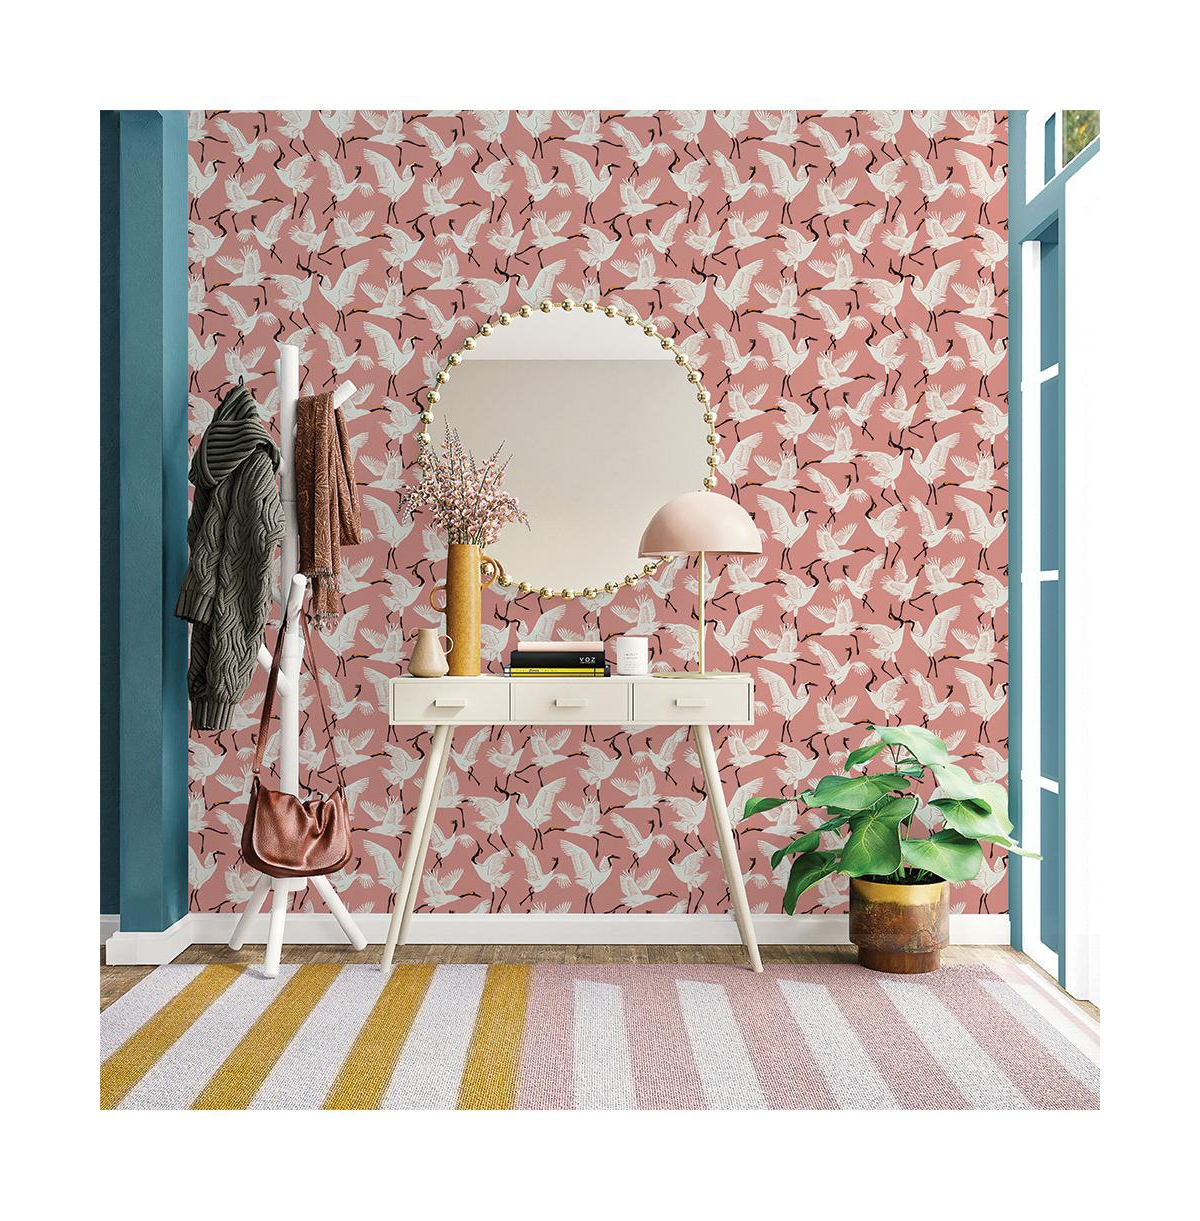 Tempaper Family Of Cranes Peel And Stick Wallpaper In Dusty Rose